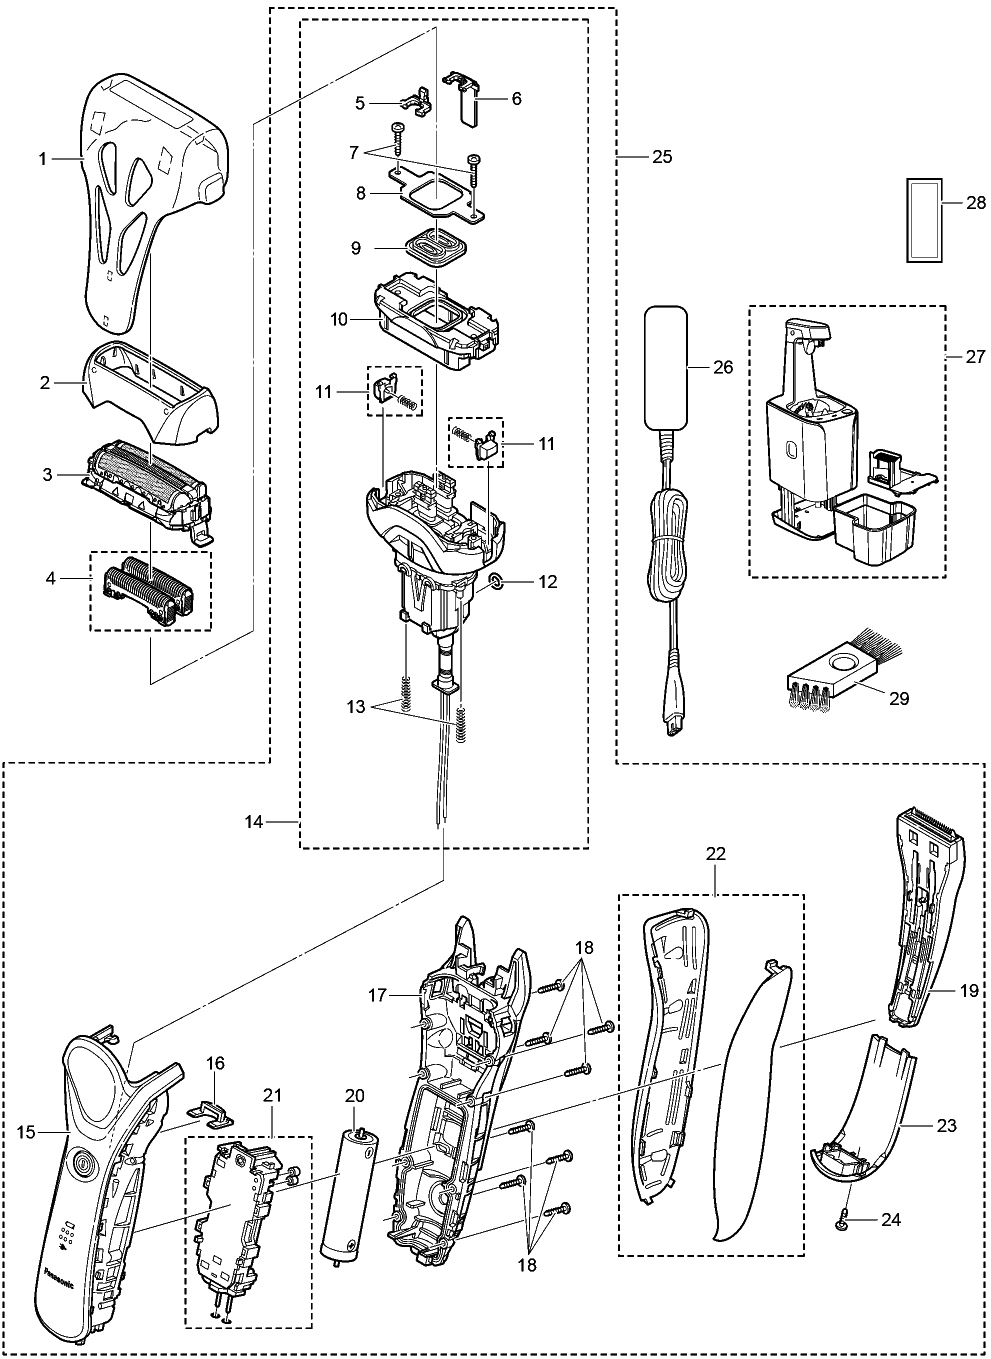 ES-RT87: Exploded View